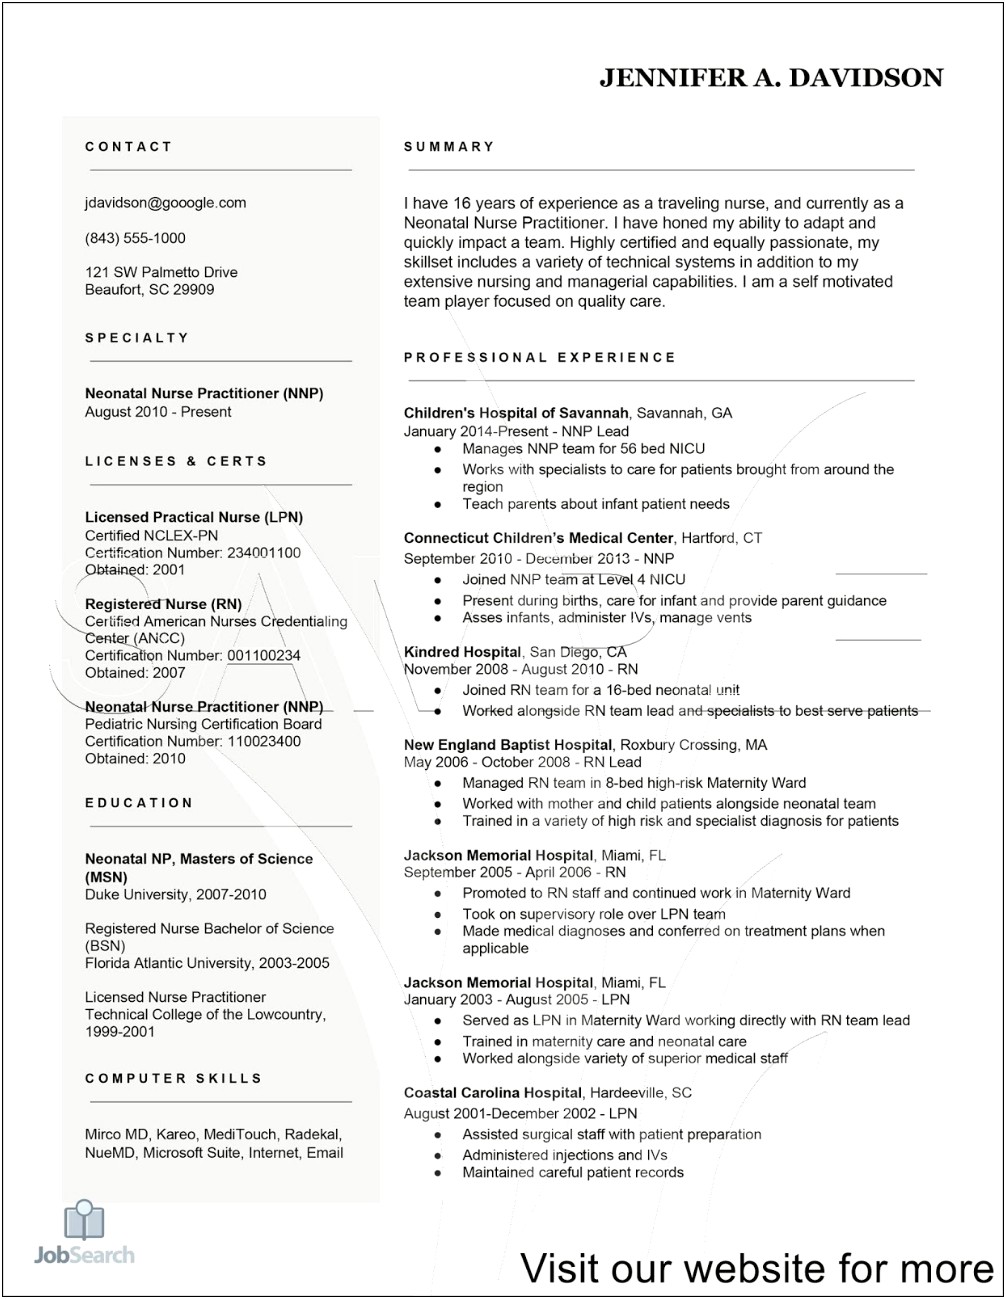 Best Resume Review Service Near Me